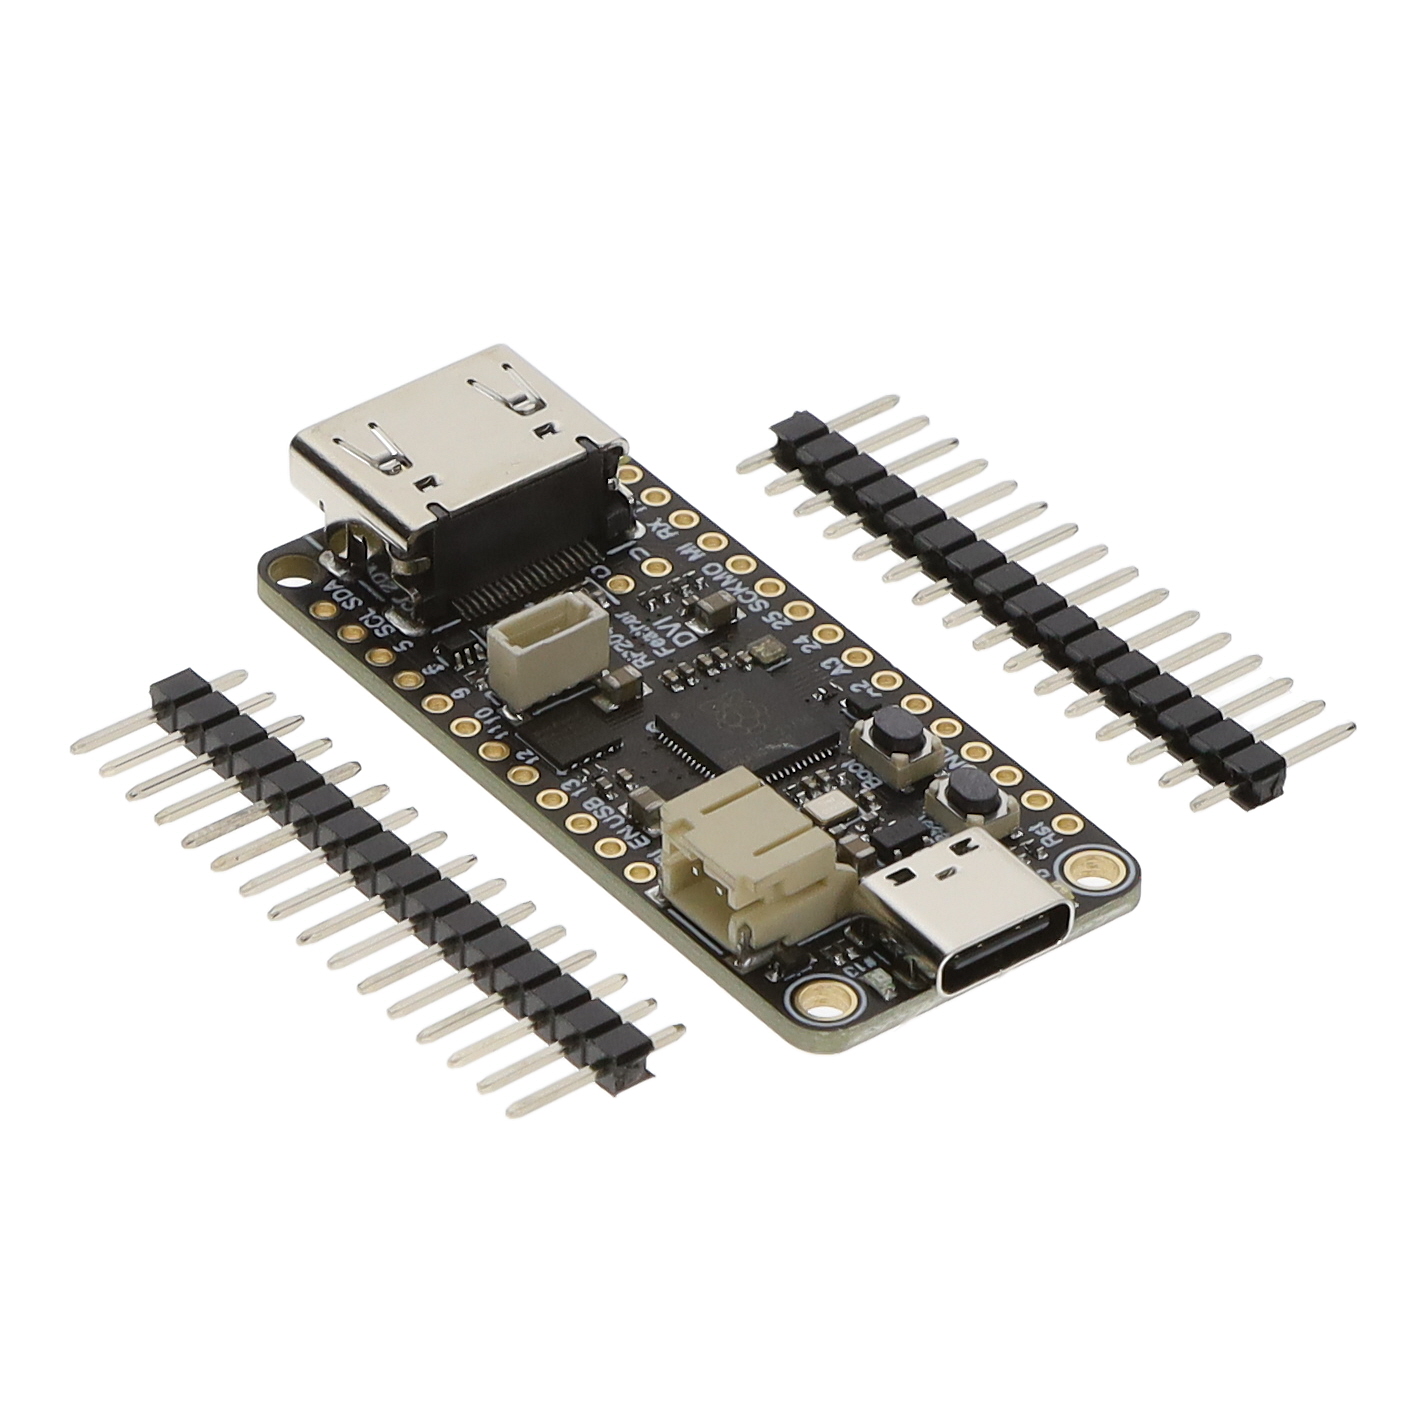 【5710】ADAFRUIT FEATHER RP2040 WITH DVI